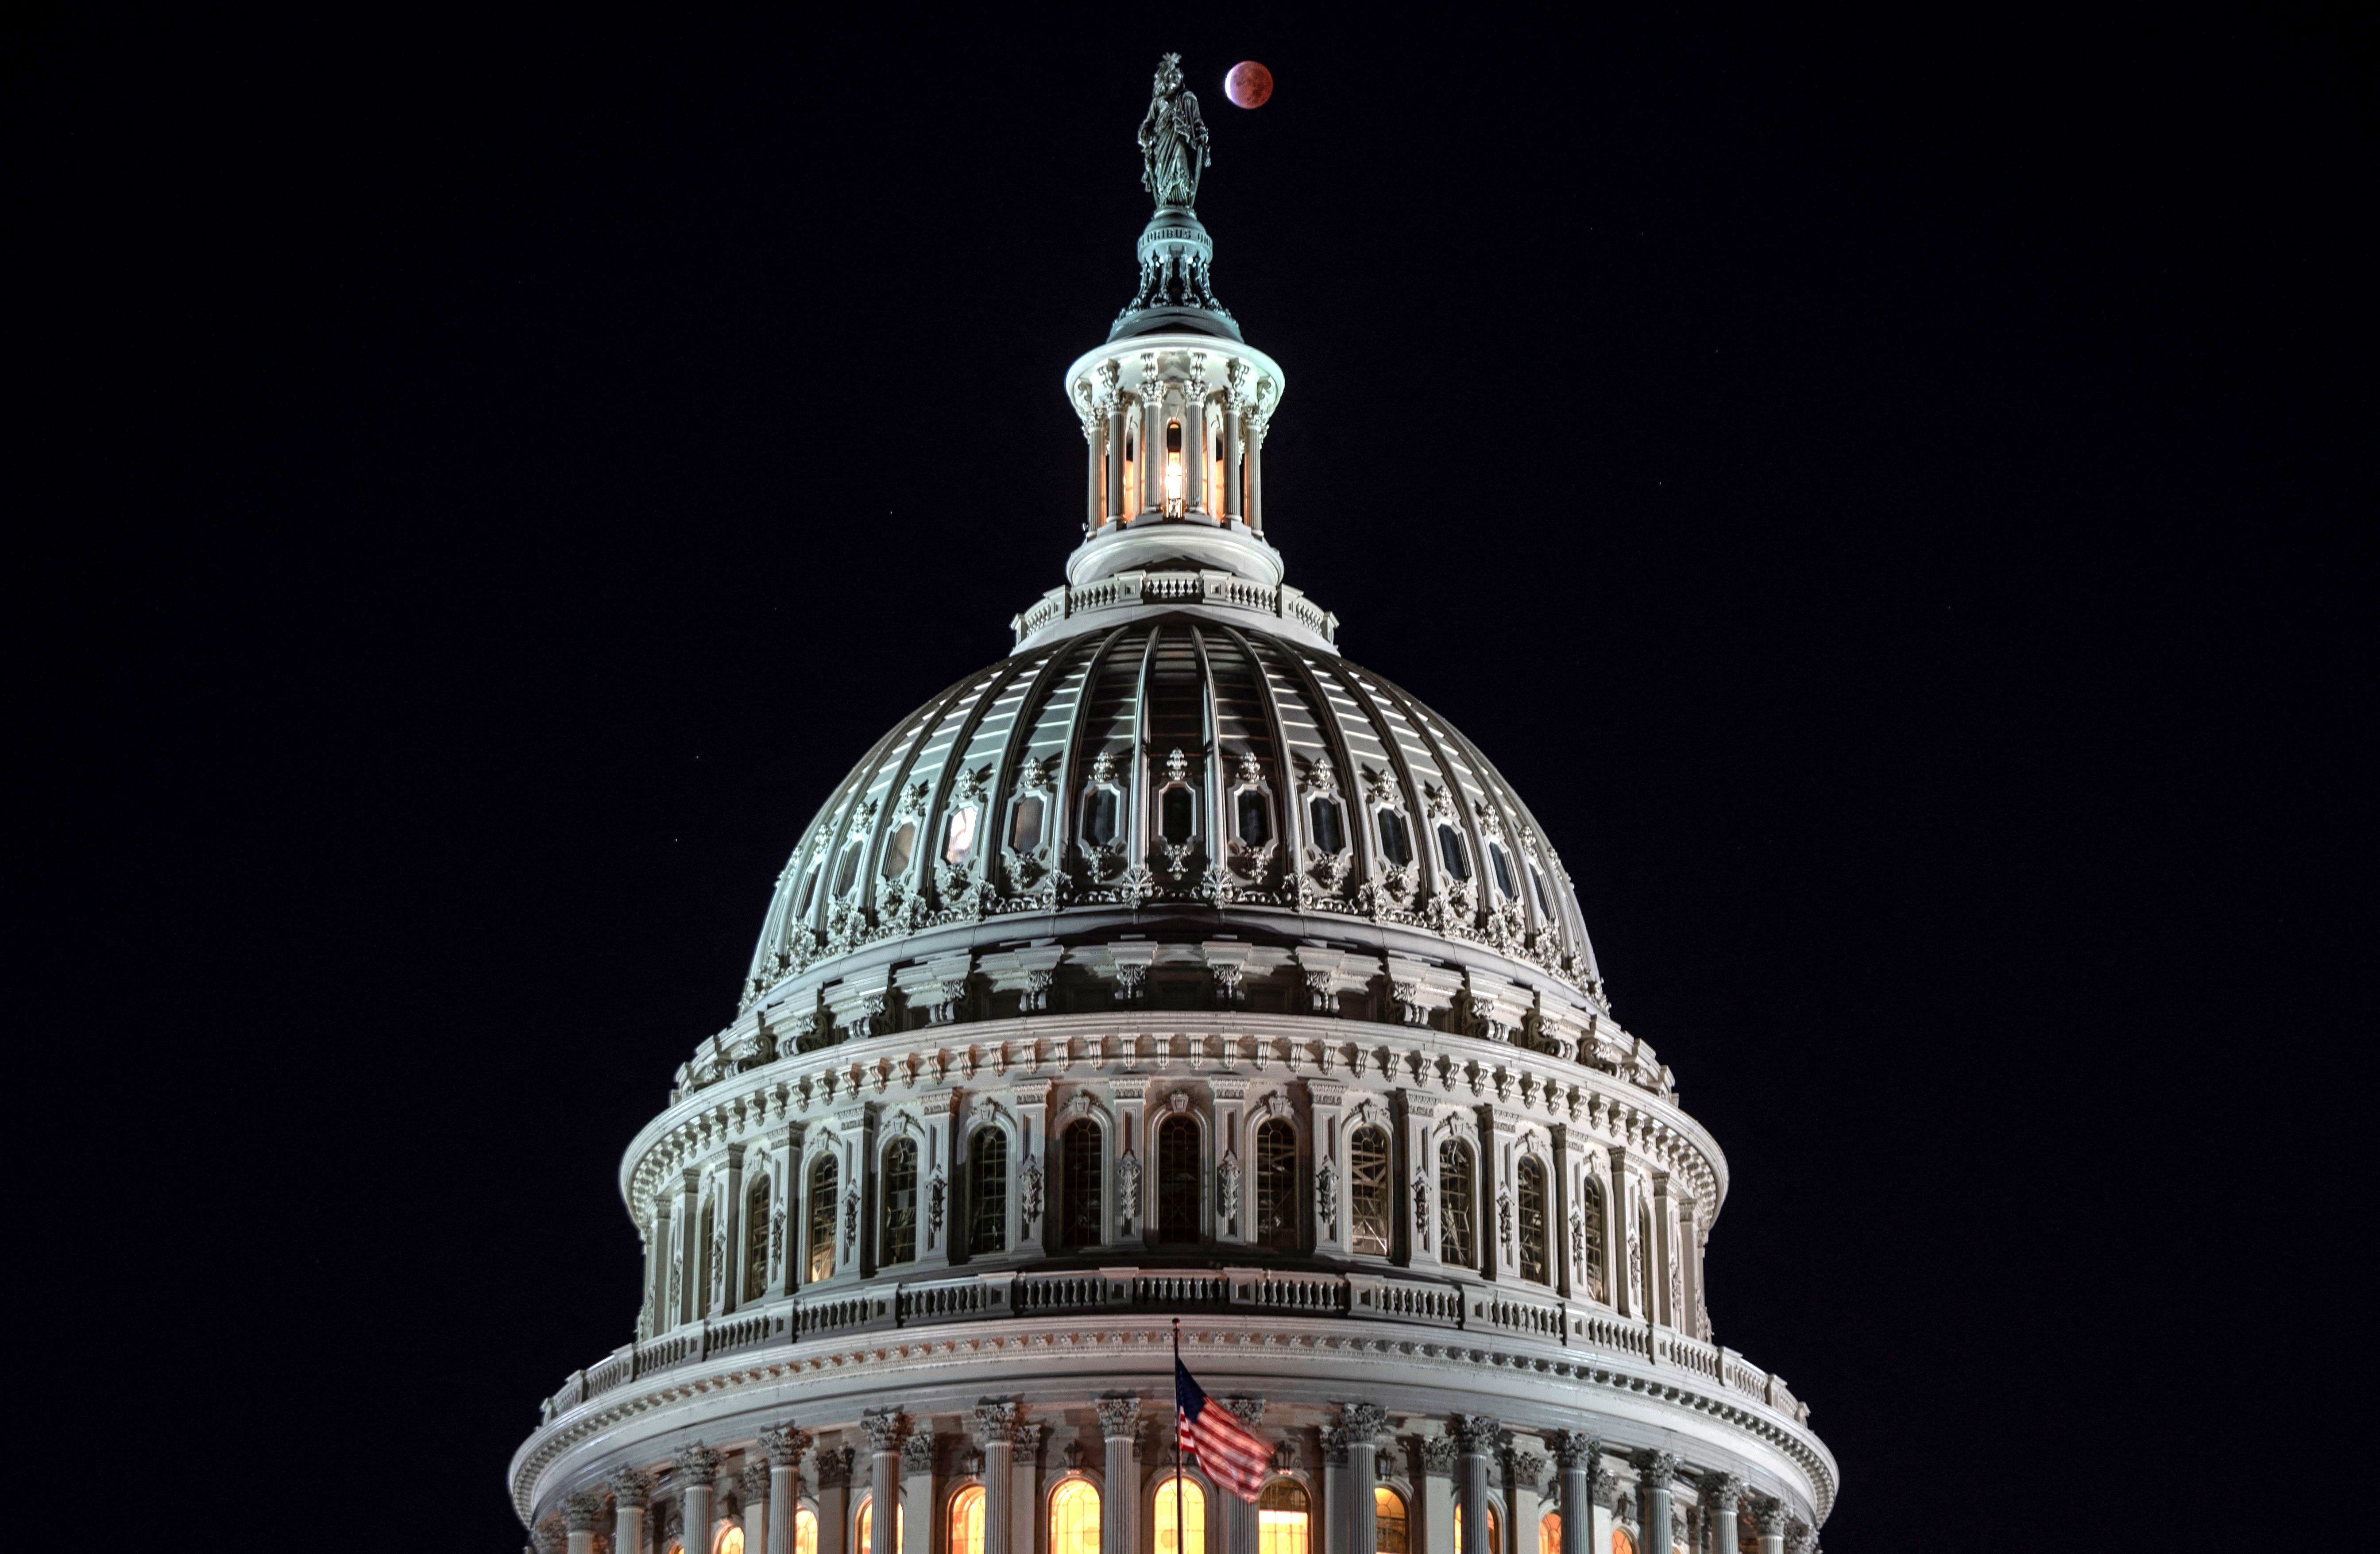 The moon, with a partial lunar eclipse, is seen behind the dome of the Capitol in Washington, DC, early on November 19.